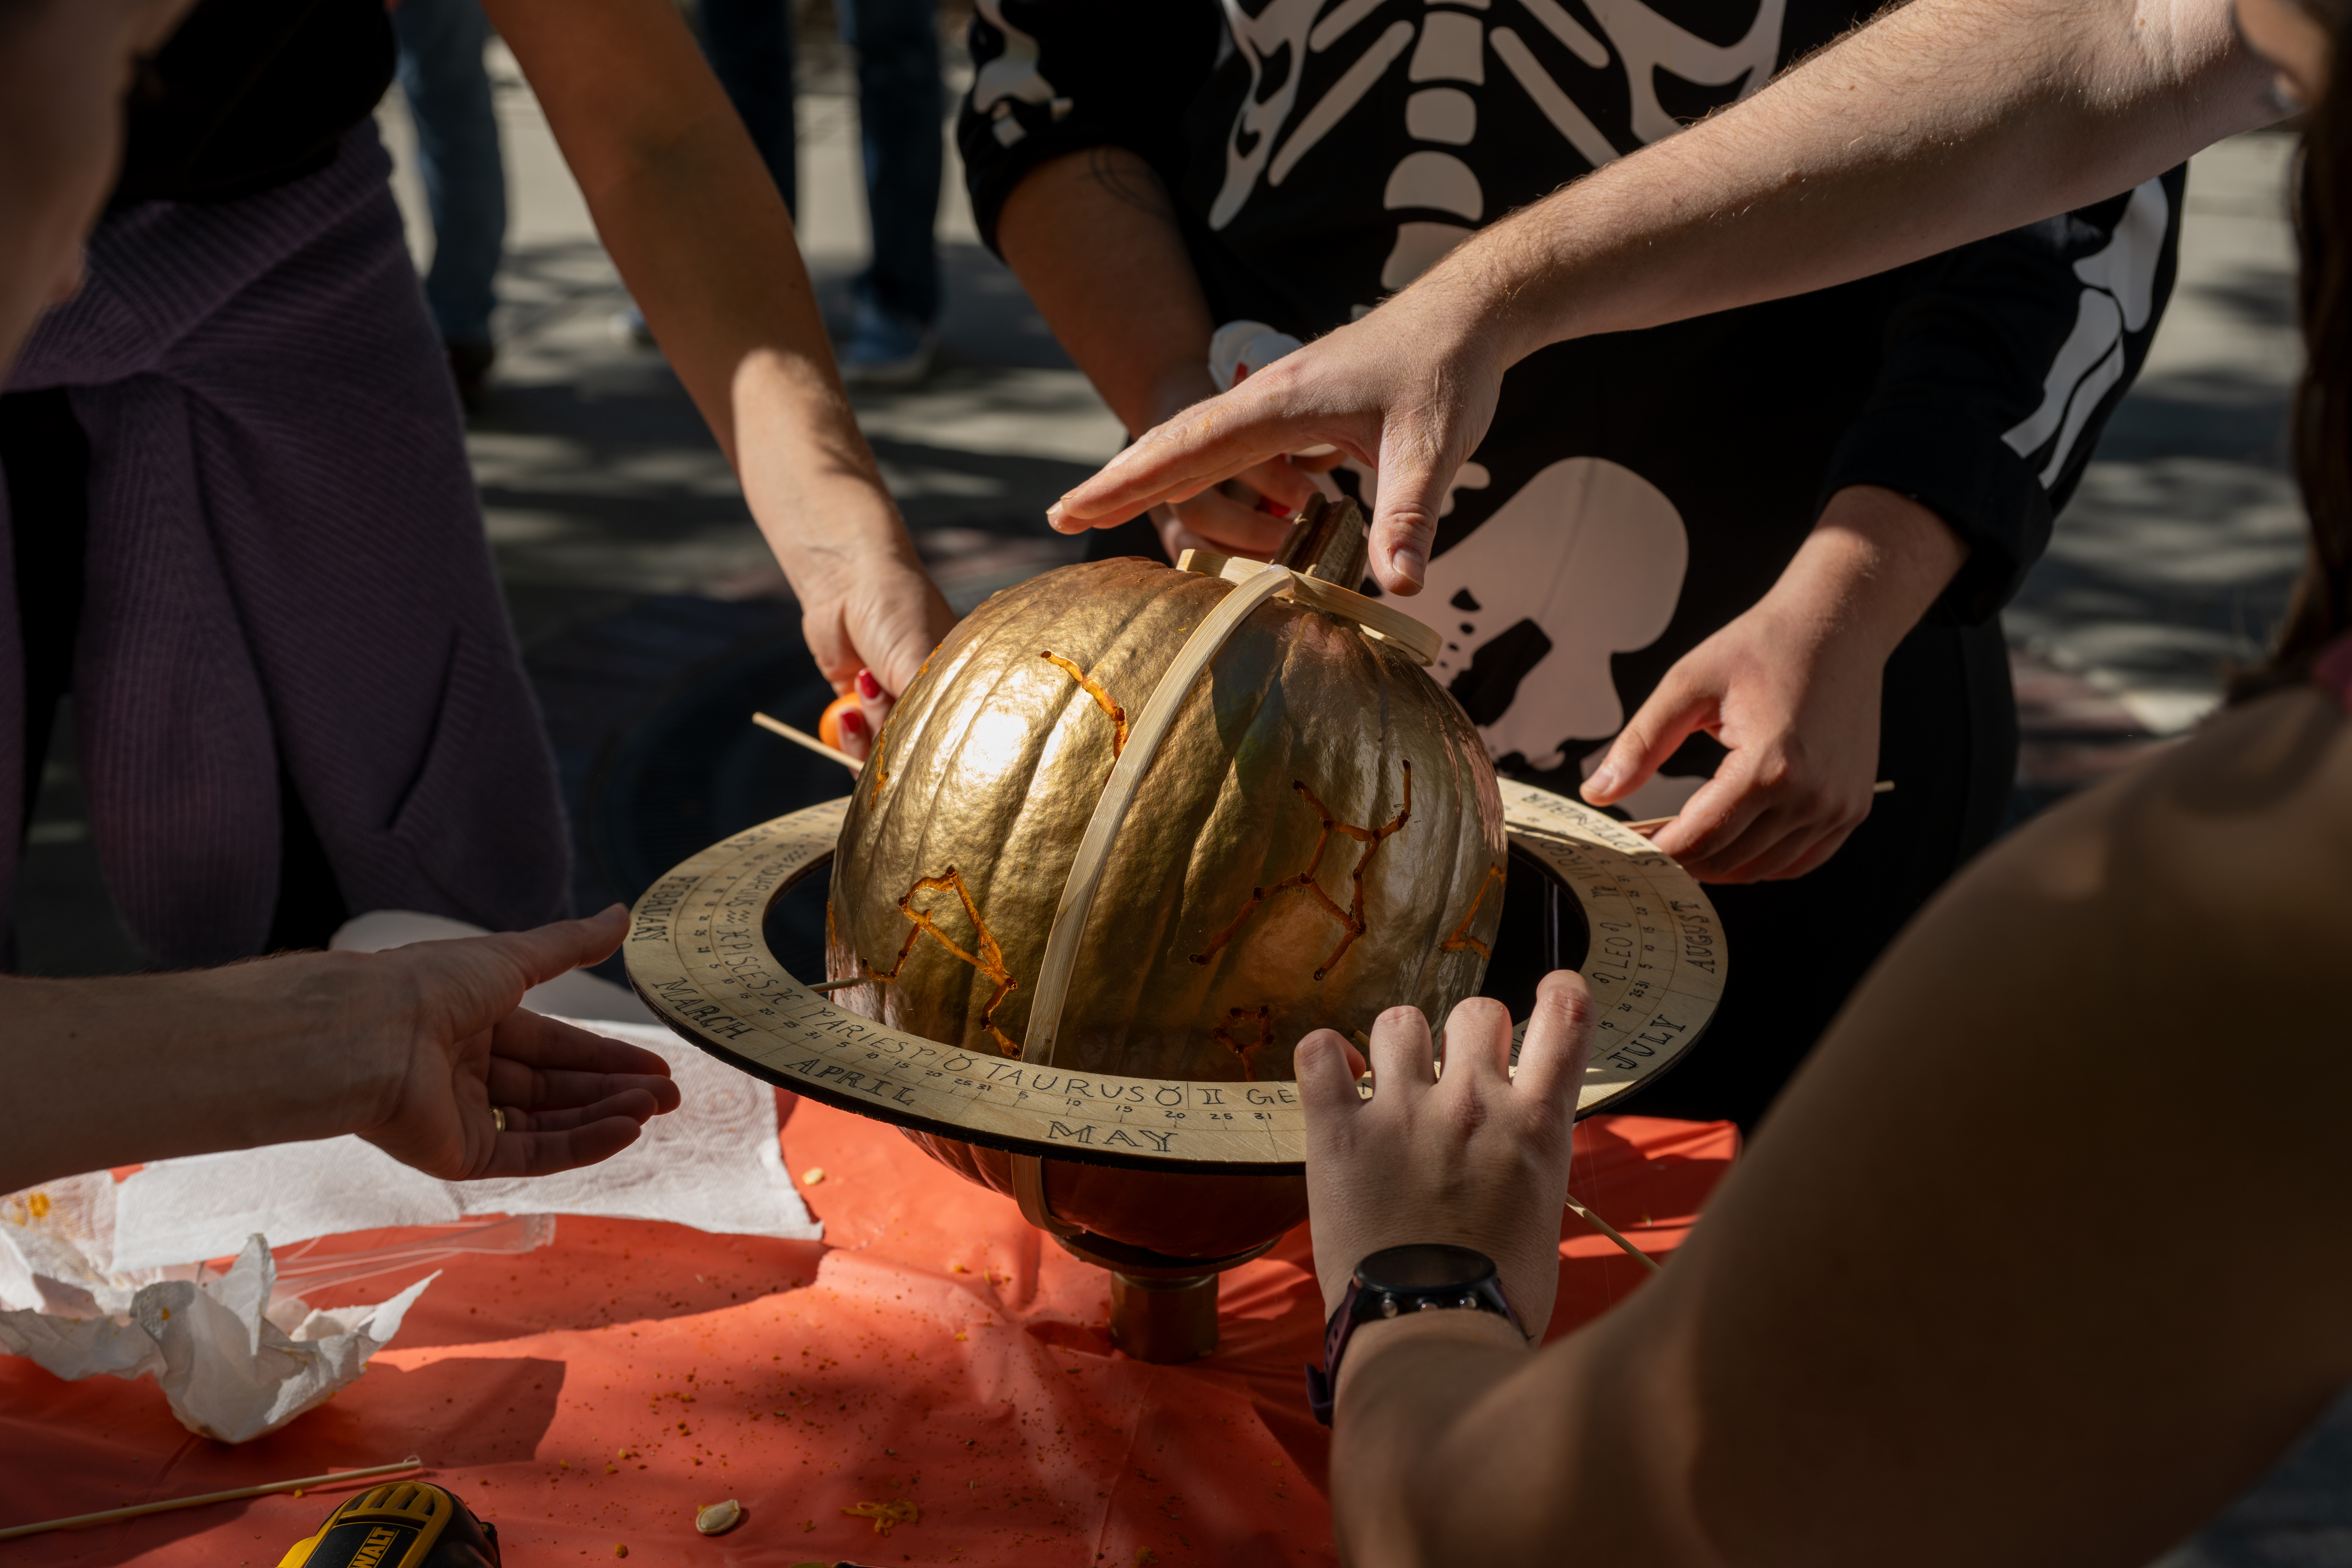 Mechanical engineers at JPL compete in the annual pumpkin-carving contest on Oct. 31, which also marks JPL’s 87th birthday.